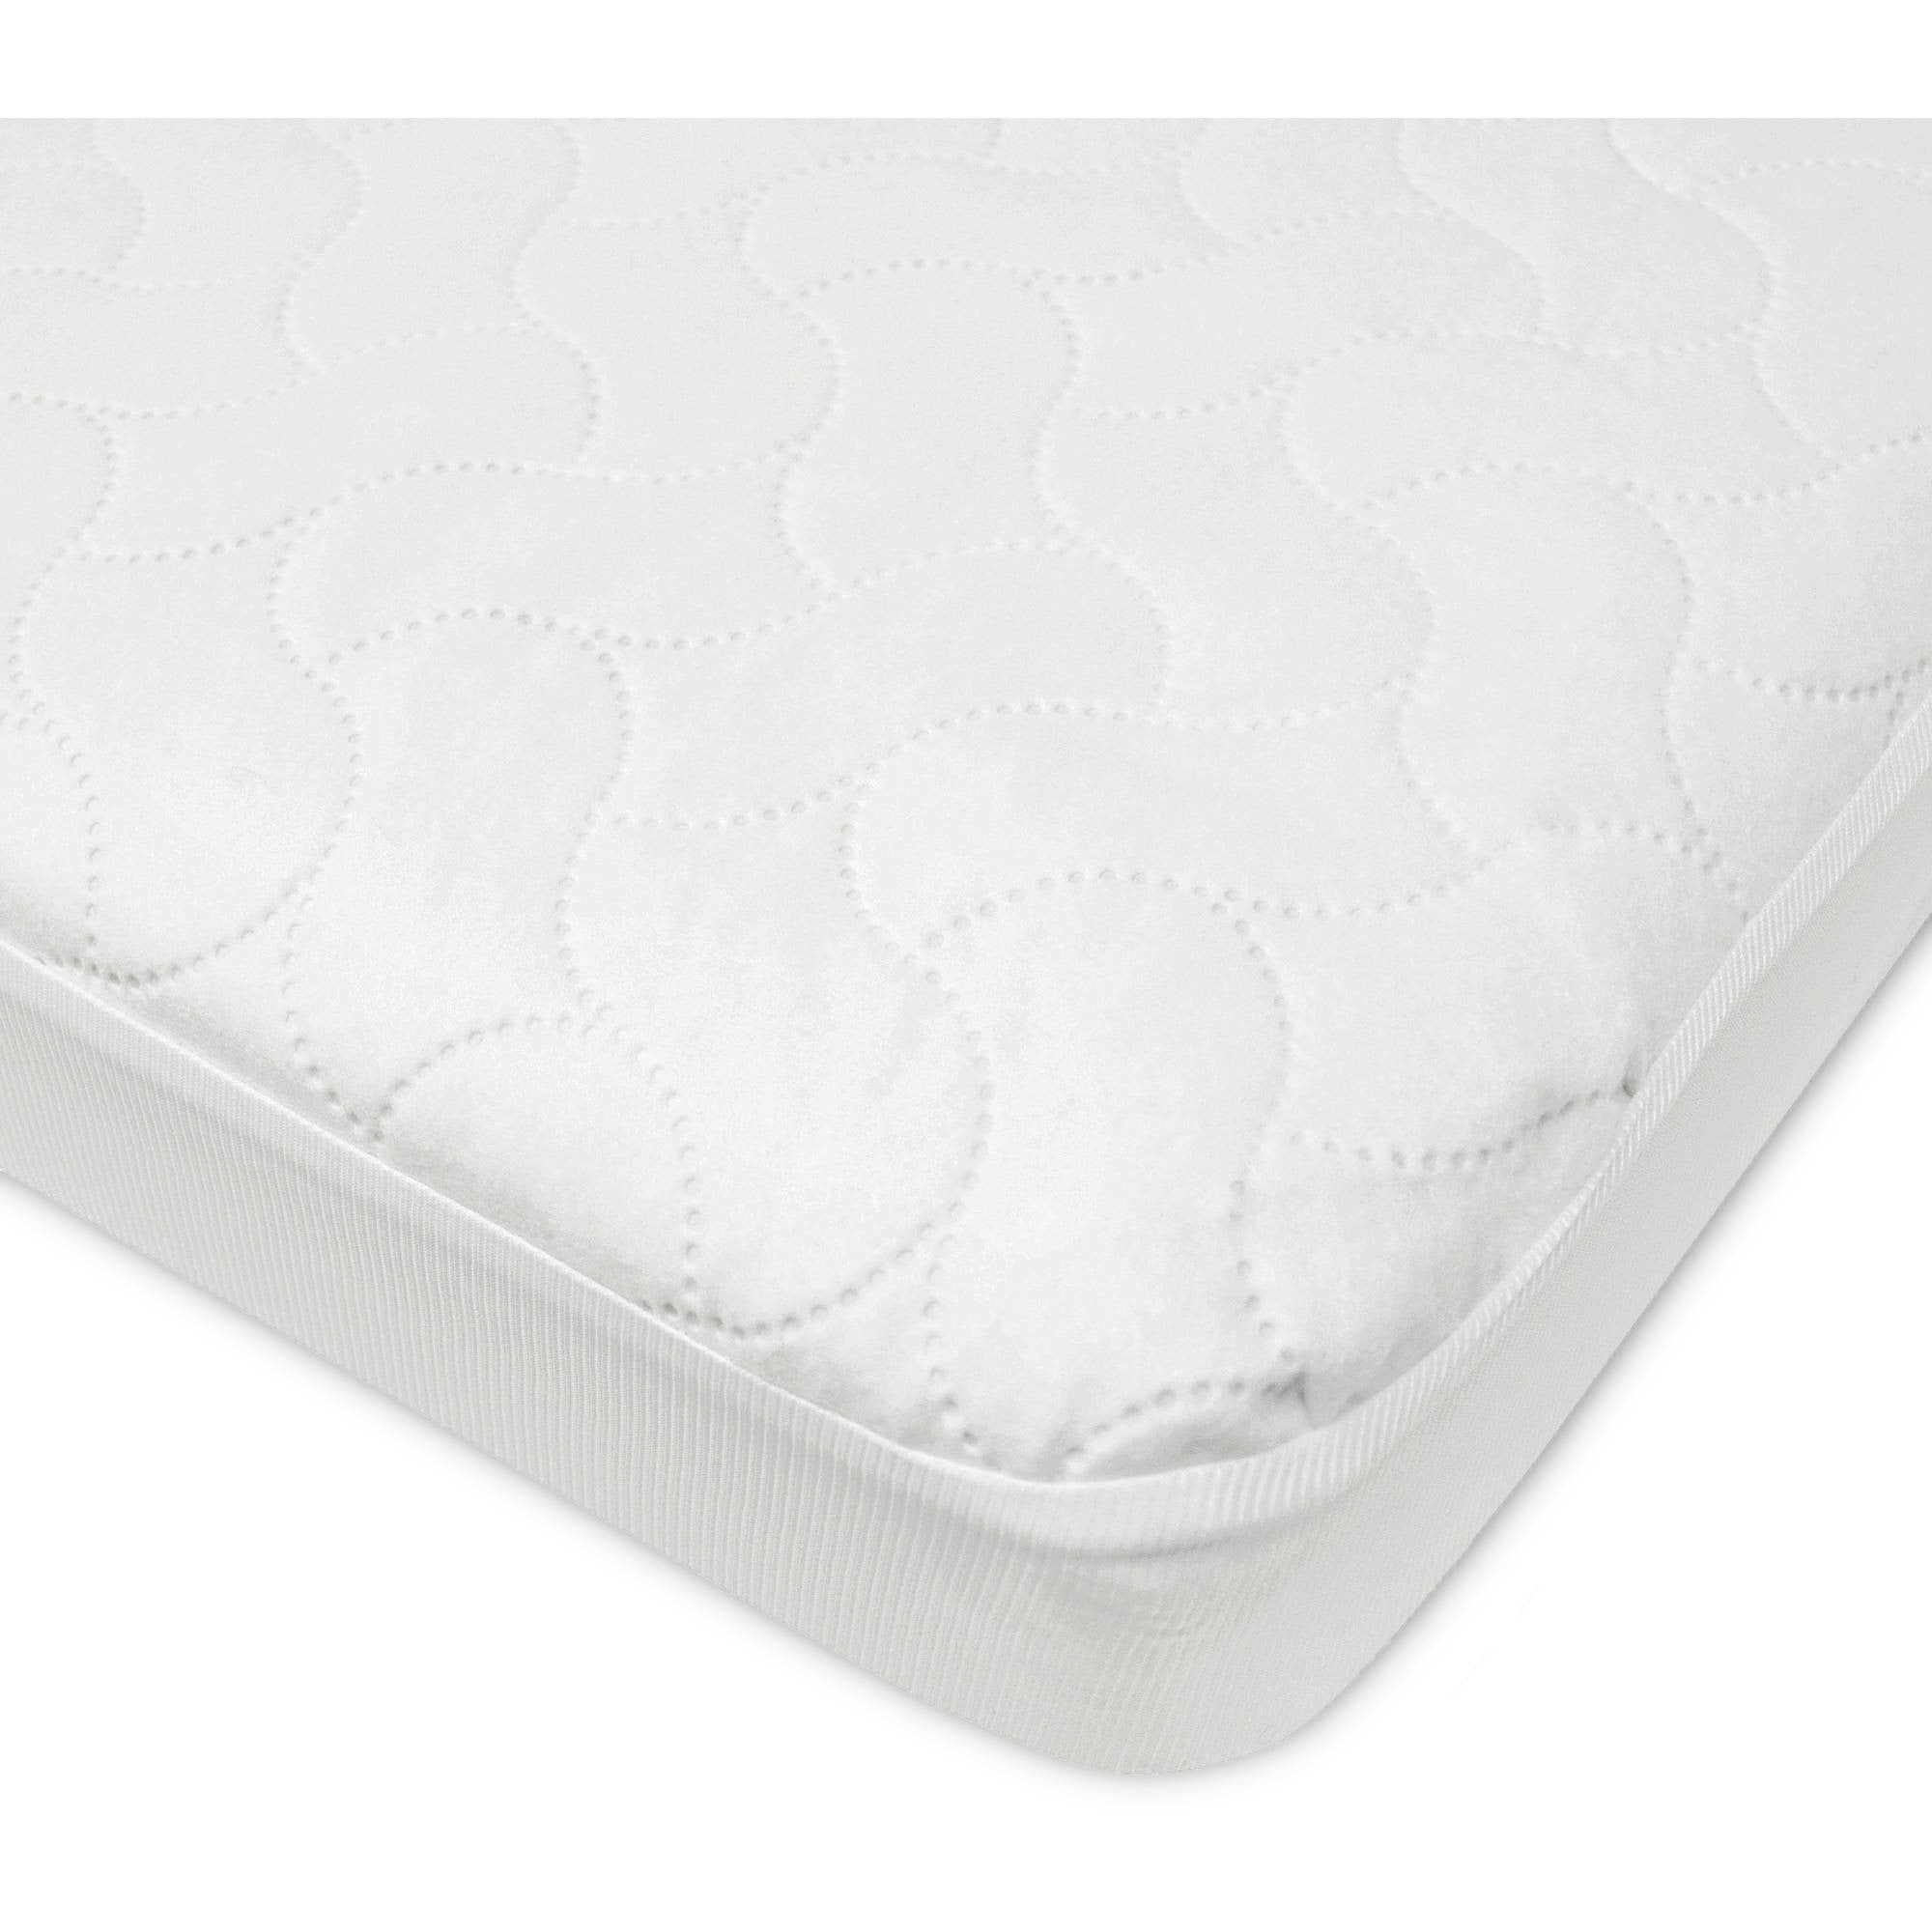 Gax New Baby Travel Cot Foam/Mattress 95x65x7 cm Waterproof Cover Fits Most Graco/M&P Toddler Cots Anti allergenic Breathable Extra Thick Quilted